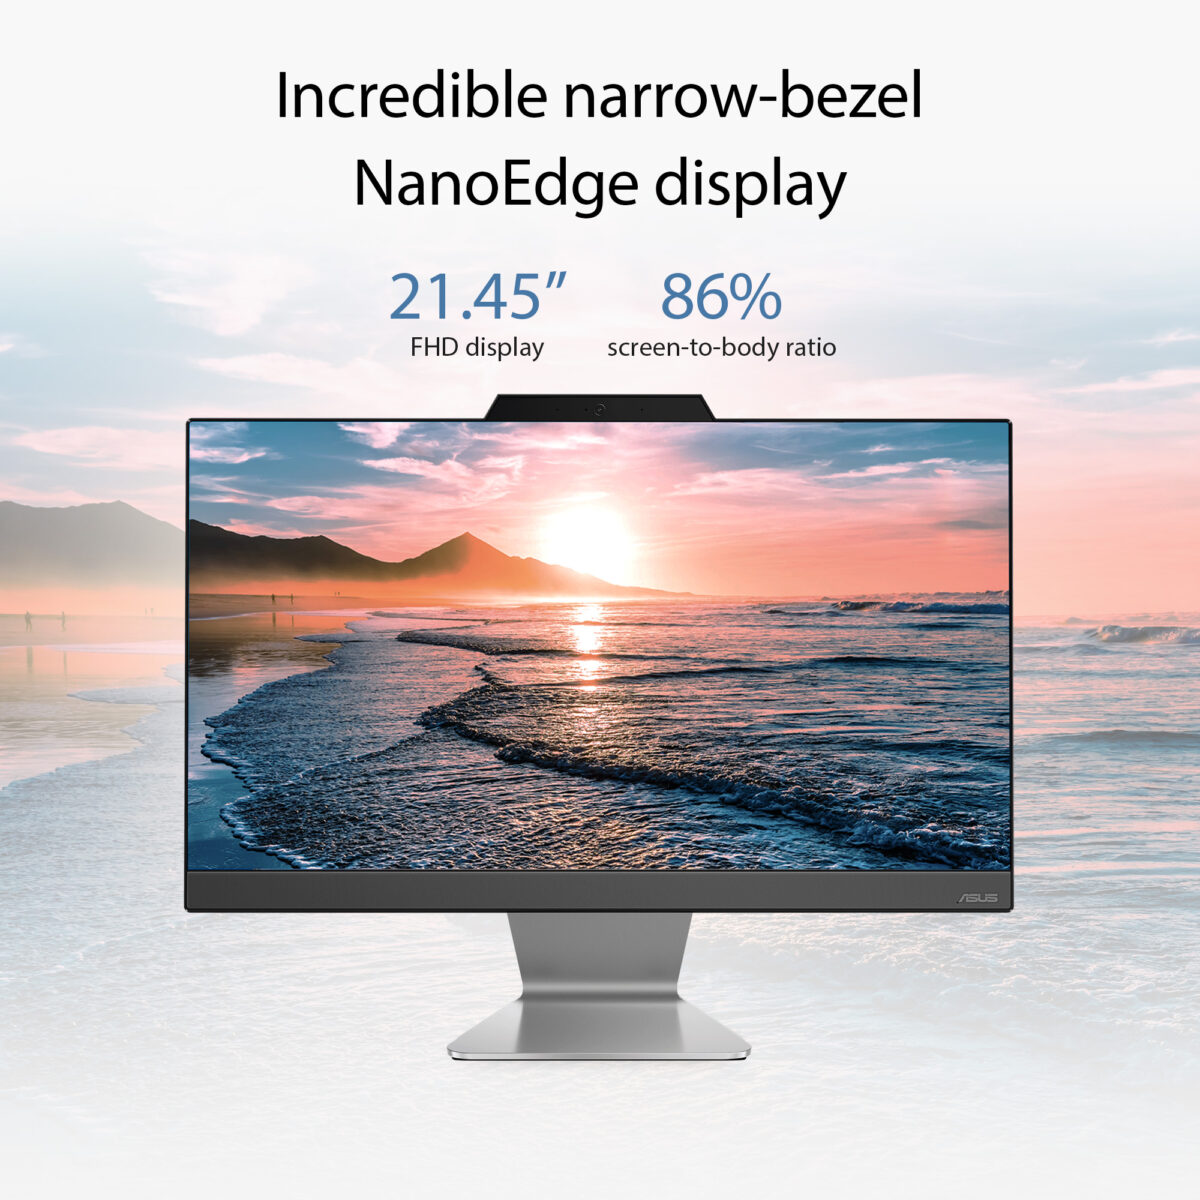 ASUS A3202 A3202WBAK-BA003WS DISPLAY Incredible narrow-bezel NanoEdge display The space-saving ASUS A3202 is remarkably slim and light, and its NanoEdge2 display features a thin bezel for edge-to-edge viewing and an impressive up to 86% screen-to-body ratio. This stunning widescreen display includes wide-view technology that makes it perfect for sharing pictures or videos with friends and family. With 21.45-inch FHD (1920 by 1080) display, everything you do is rendered in vivid detail, with amazing color and contrast — for work or play. 21.45” FHD display 86% screen-to-body ratio